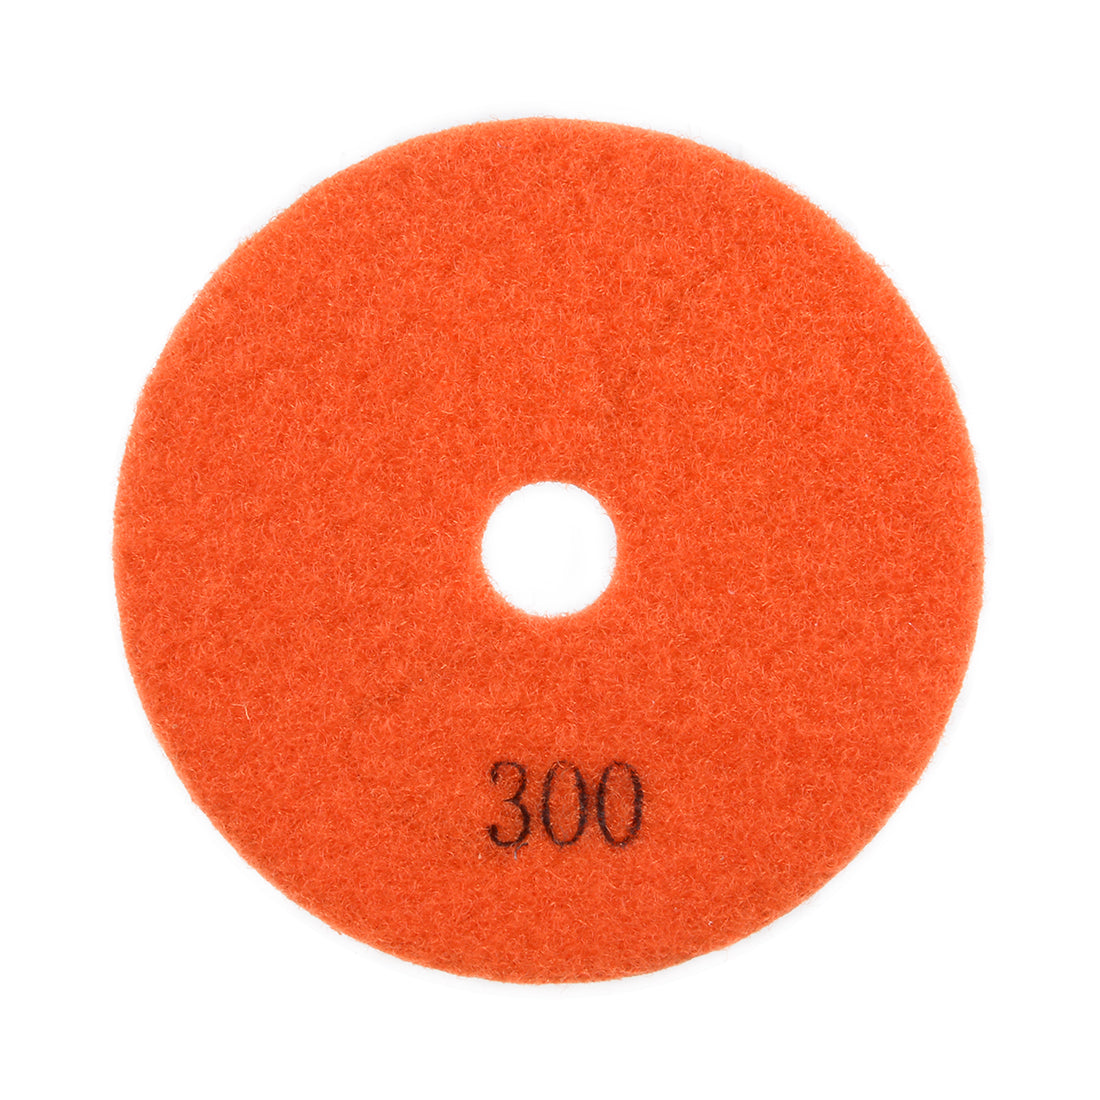 uxcell Uxcell Diamond Polishing Sanding Grinding Pads Discs 4 Inch Grit 300 10 Pcs for Granite Concrete Stone Marble